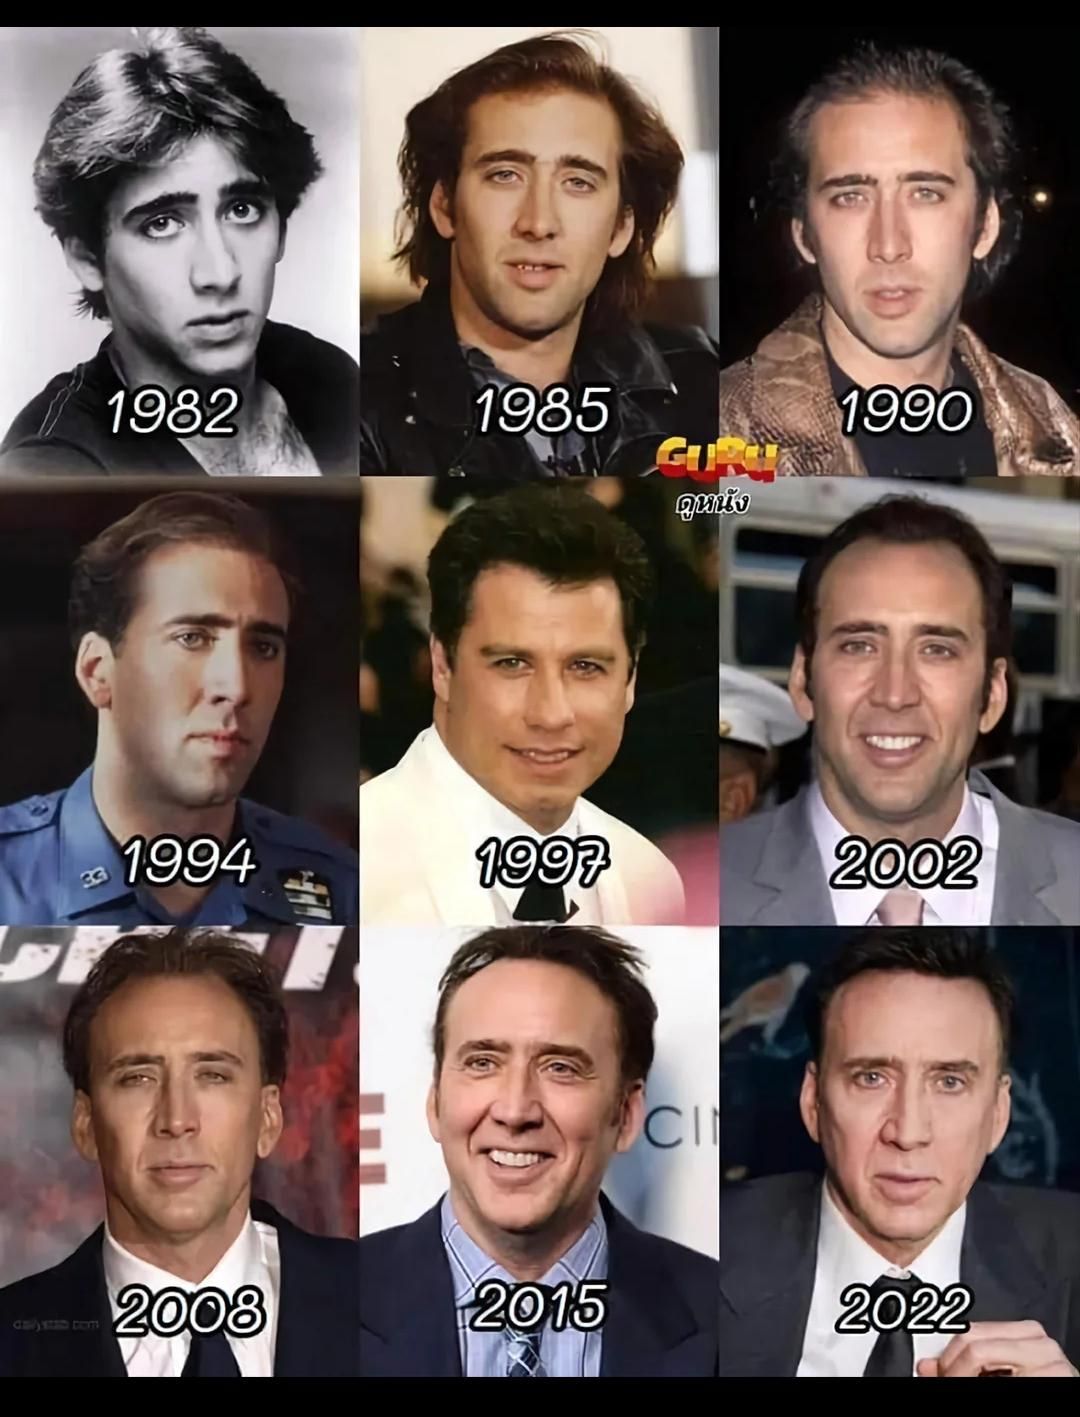 the man doesn't age.